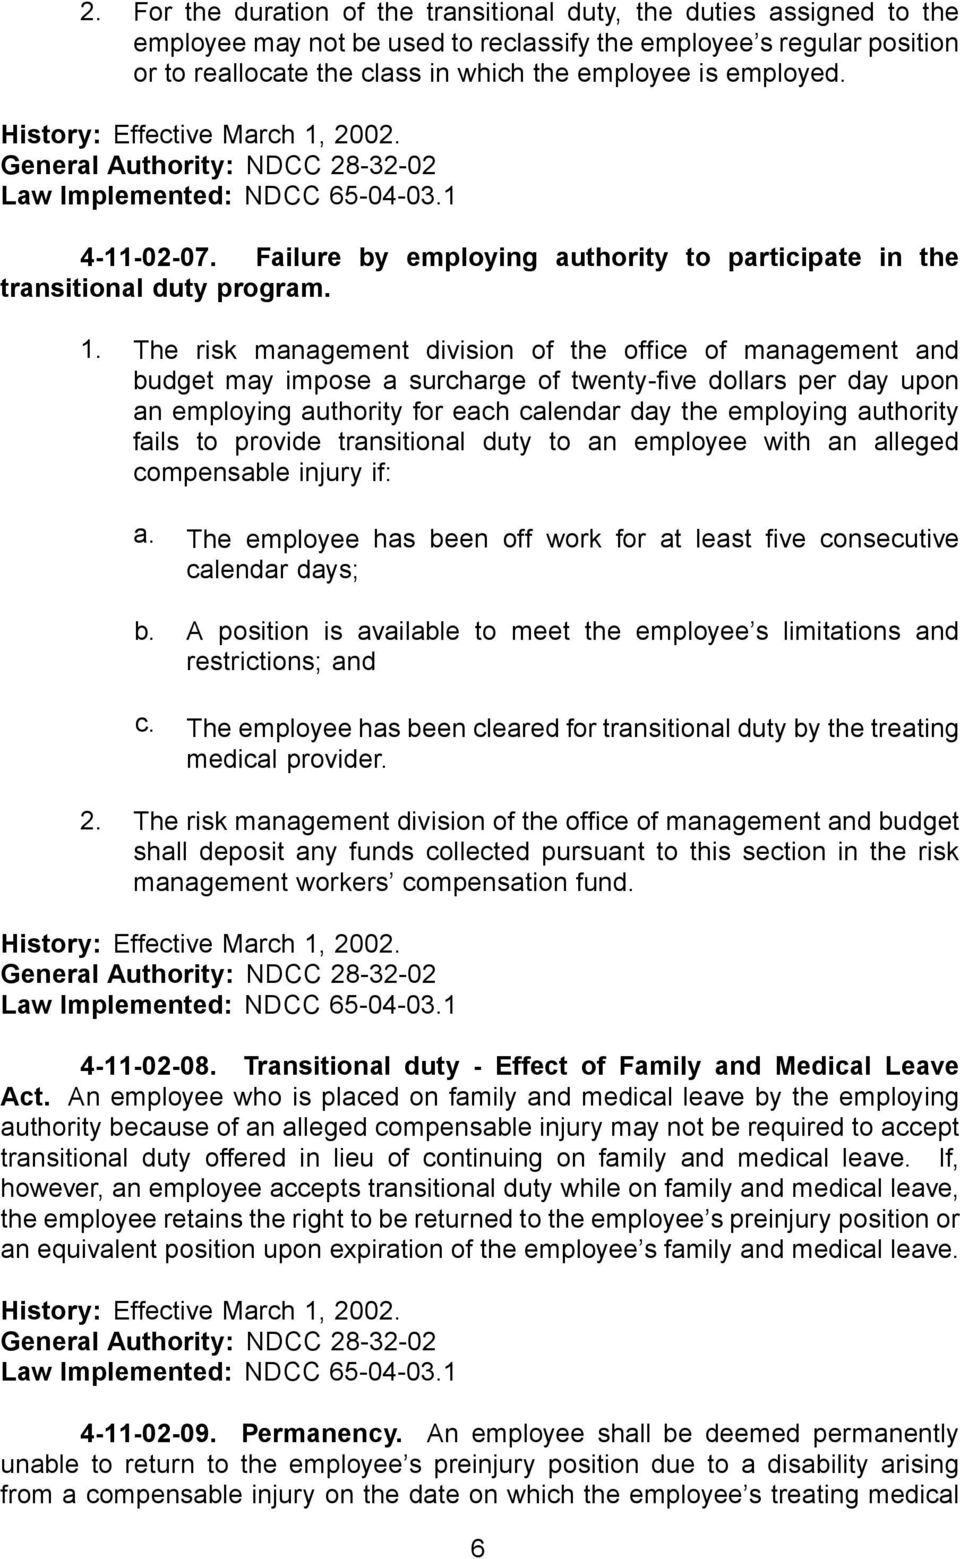 The risk management division of the office of management and budget may impose a surcharge of twenty-five dollars per day upon an employing authority for each calendar day the employing authority